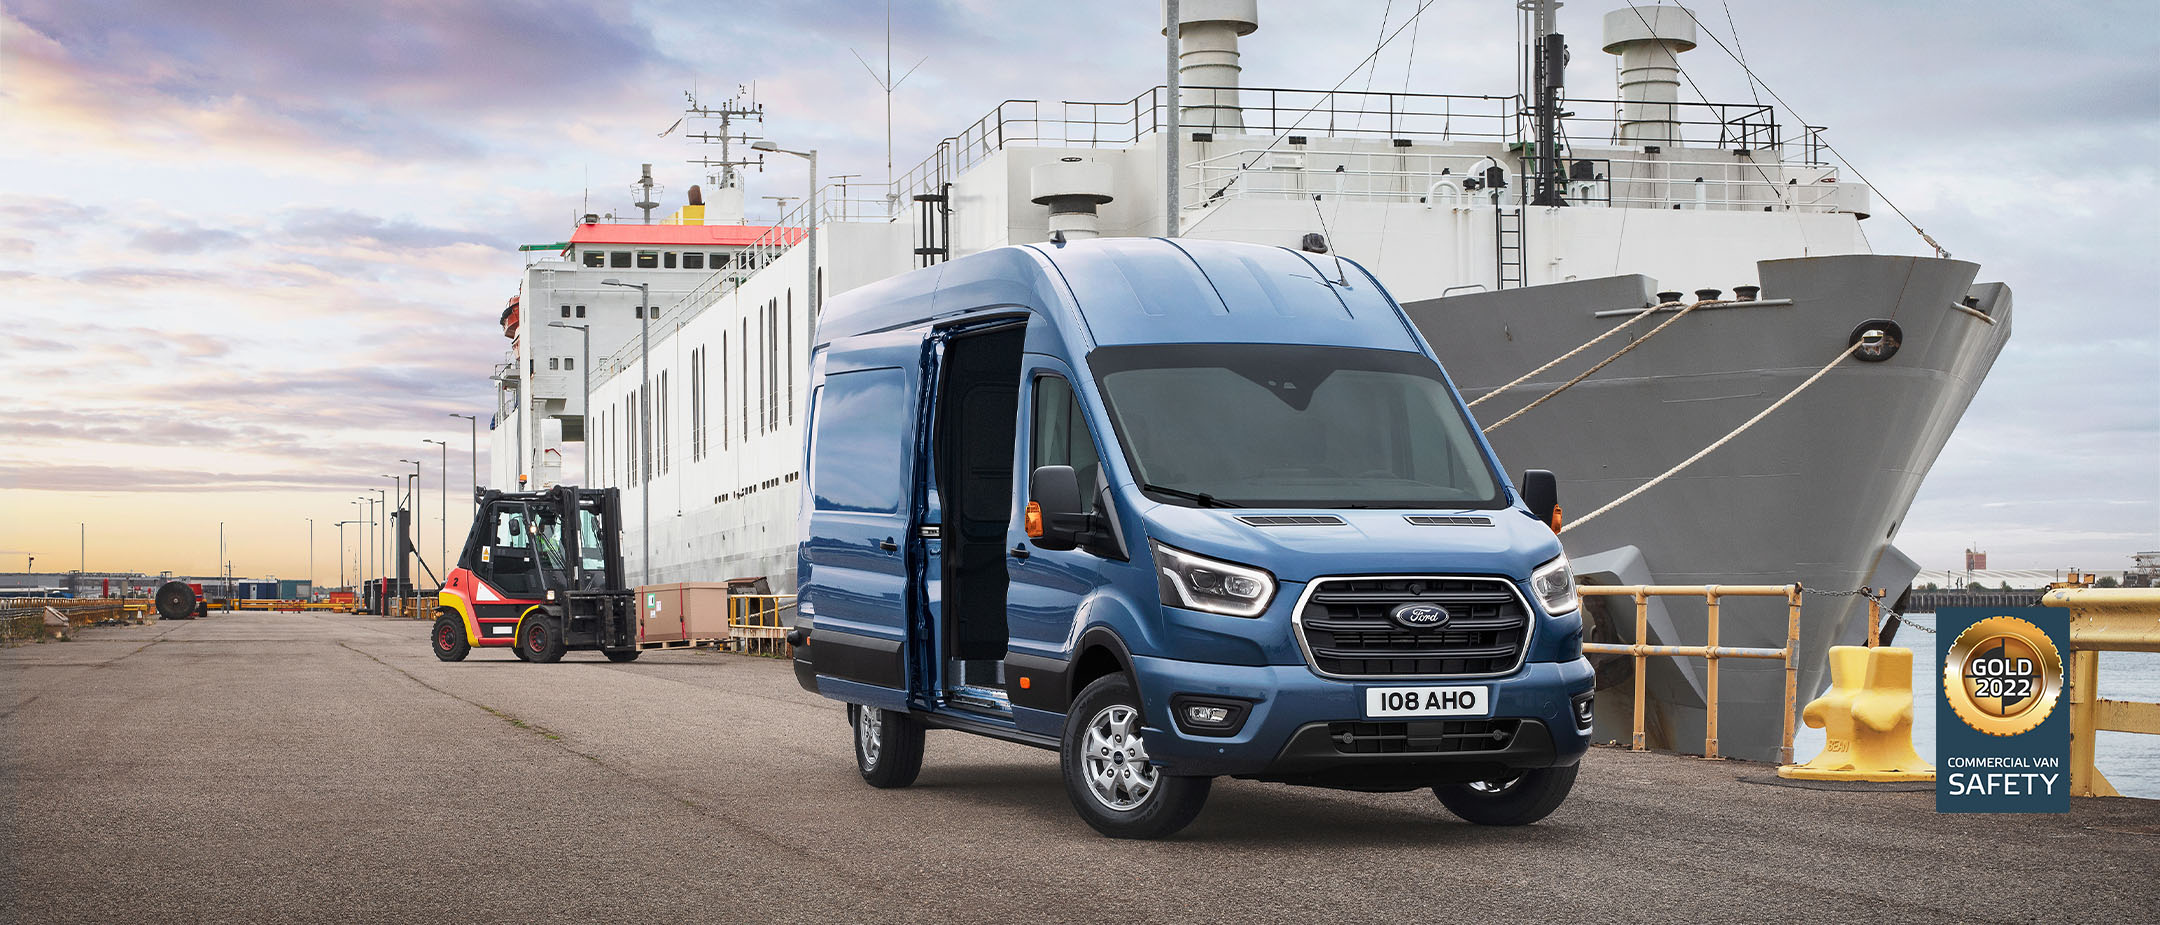 New Blue Ford Transit Van parked outside ship